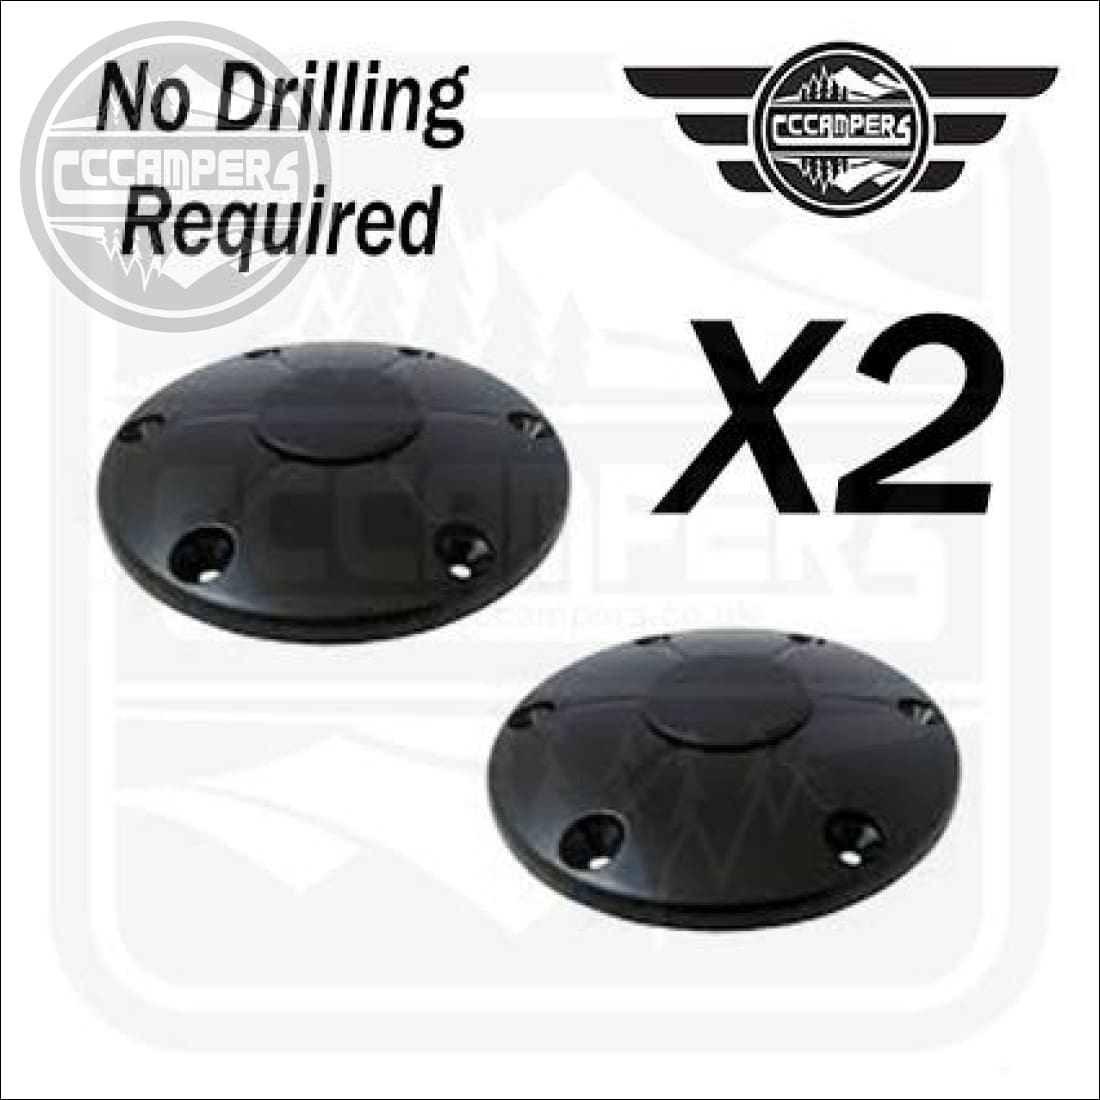 No hole drilling Black TABLE LEG SYSTEM by Redwood™ - cccampers.myshopify.com